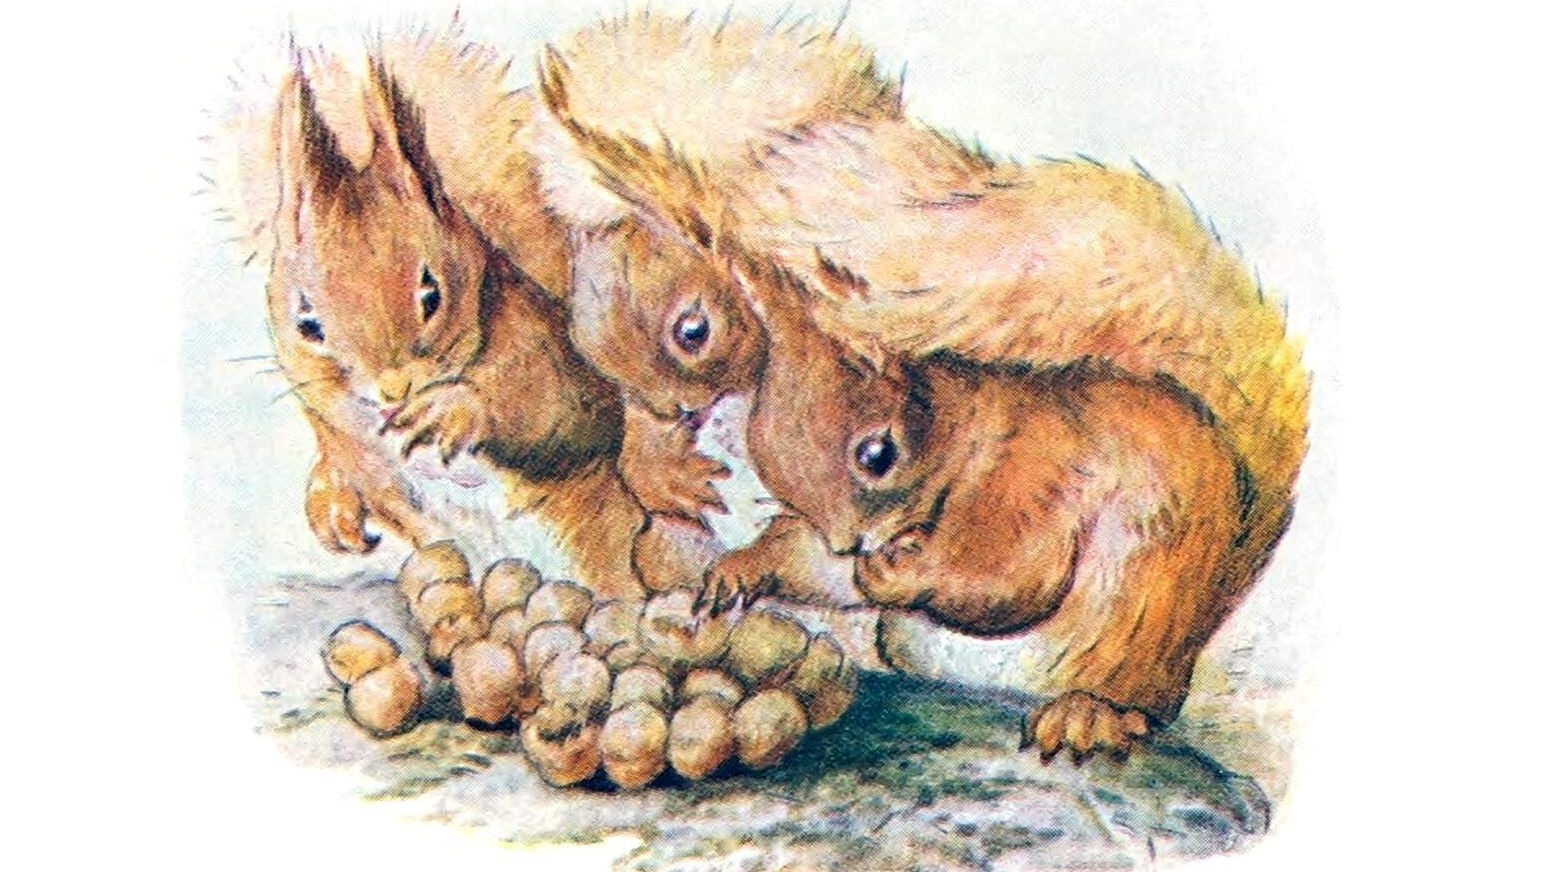 A watercolour illustration by Beatrix Potter, for The Tale Of Squirrel Nutkin, depicting three red squirrels looking at a heap of hazelnuts they've collected